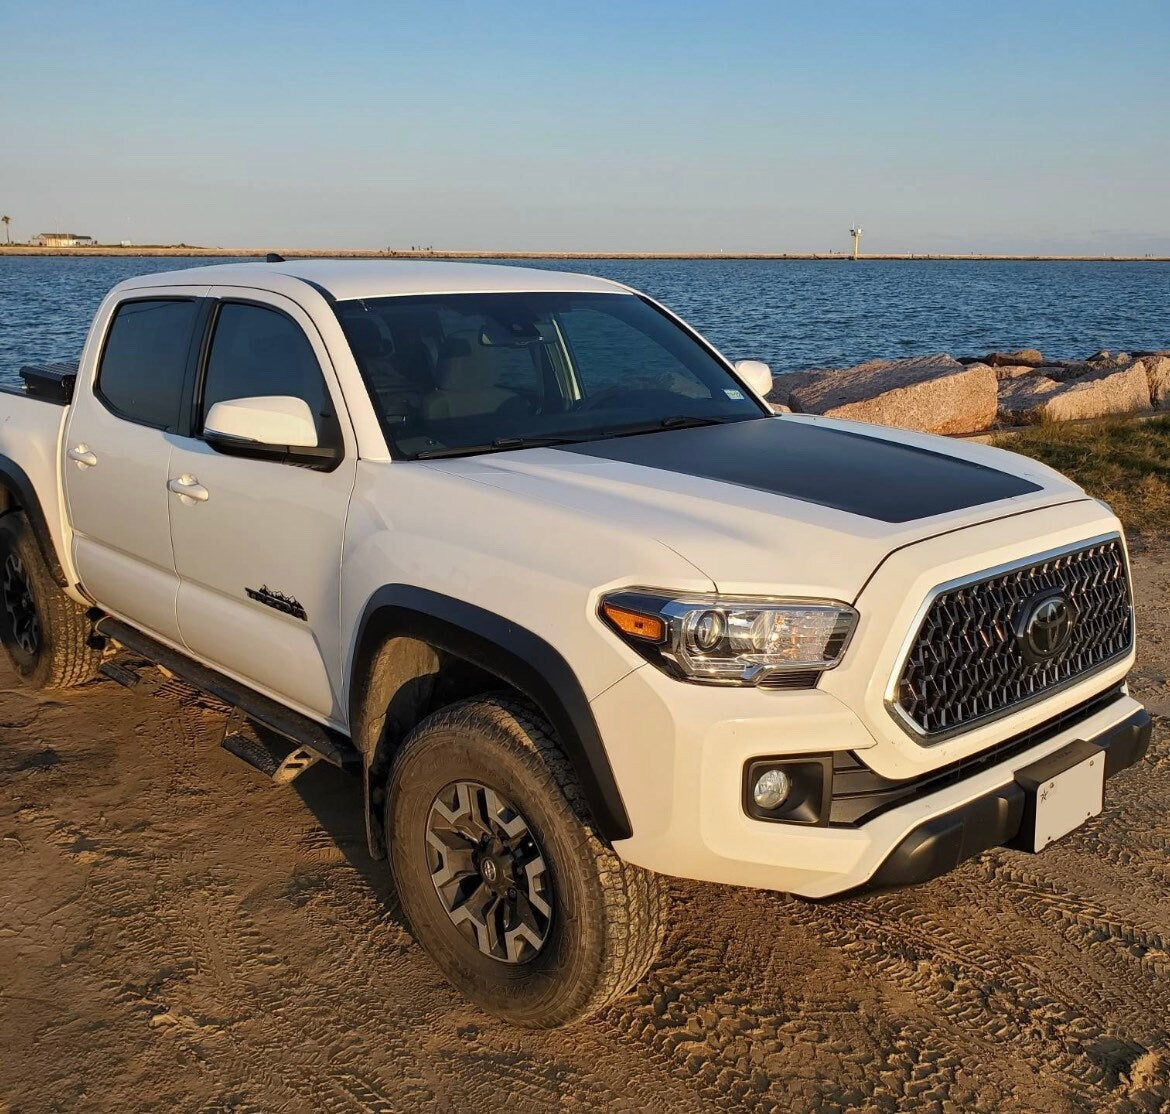 MATTE BLACK - 2014-2022 Tacoma FULL Front Hood Decal Vinyl Graphic